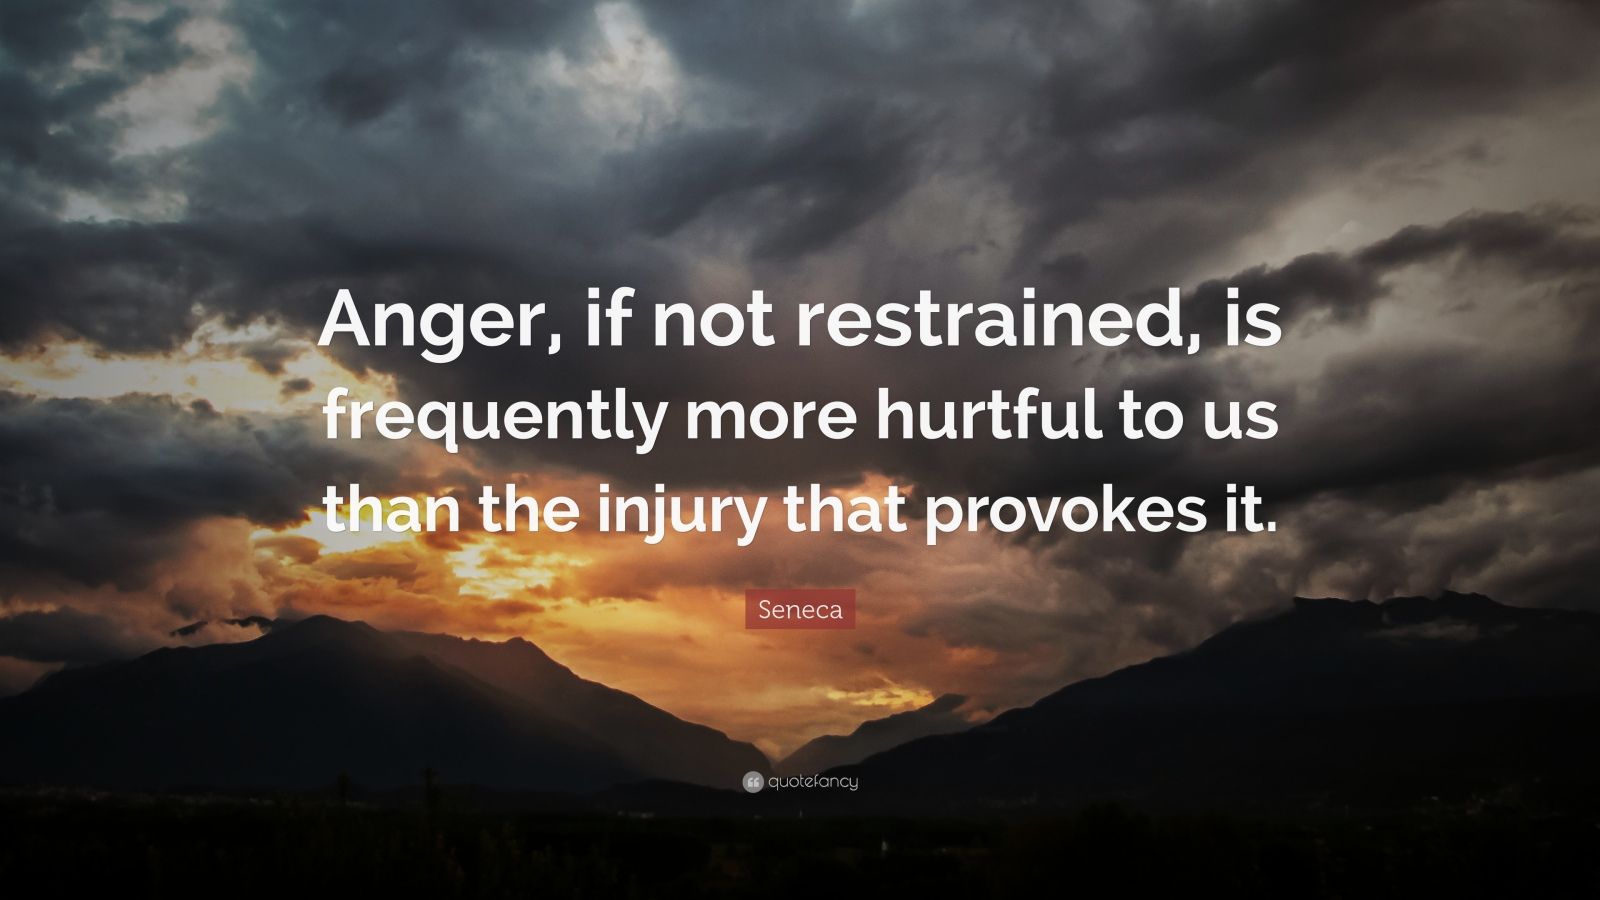 seneca quote: "anger, if not restrained, is frequently more